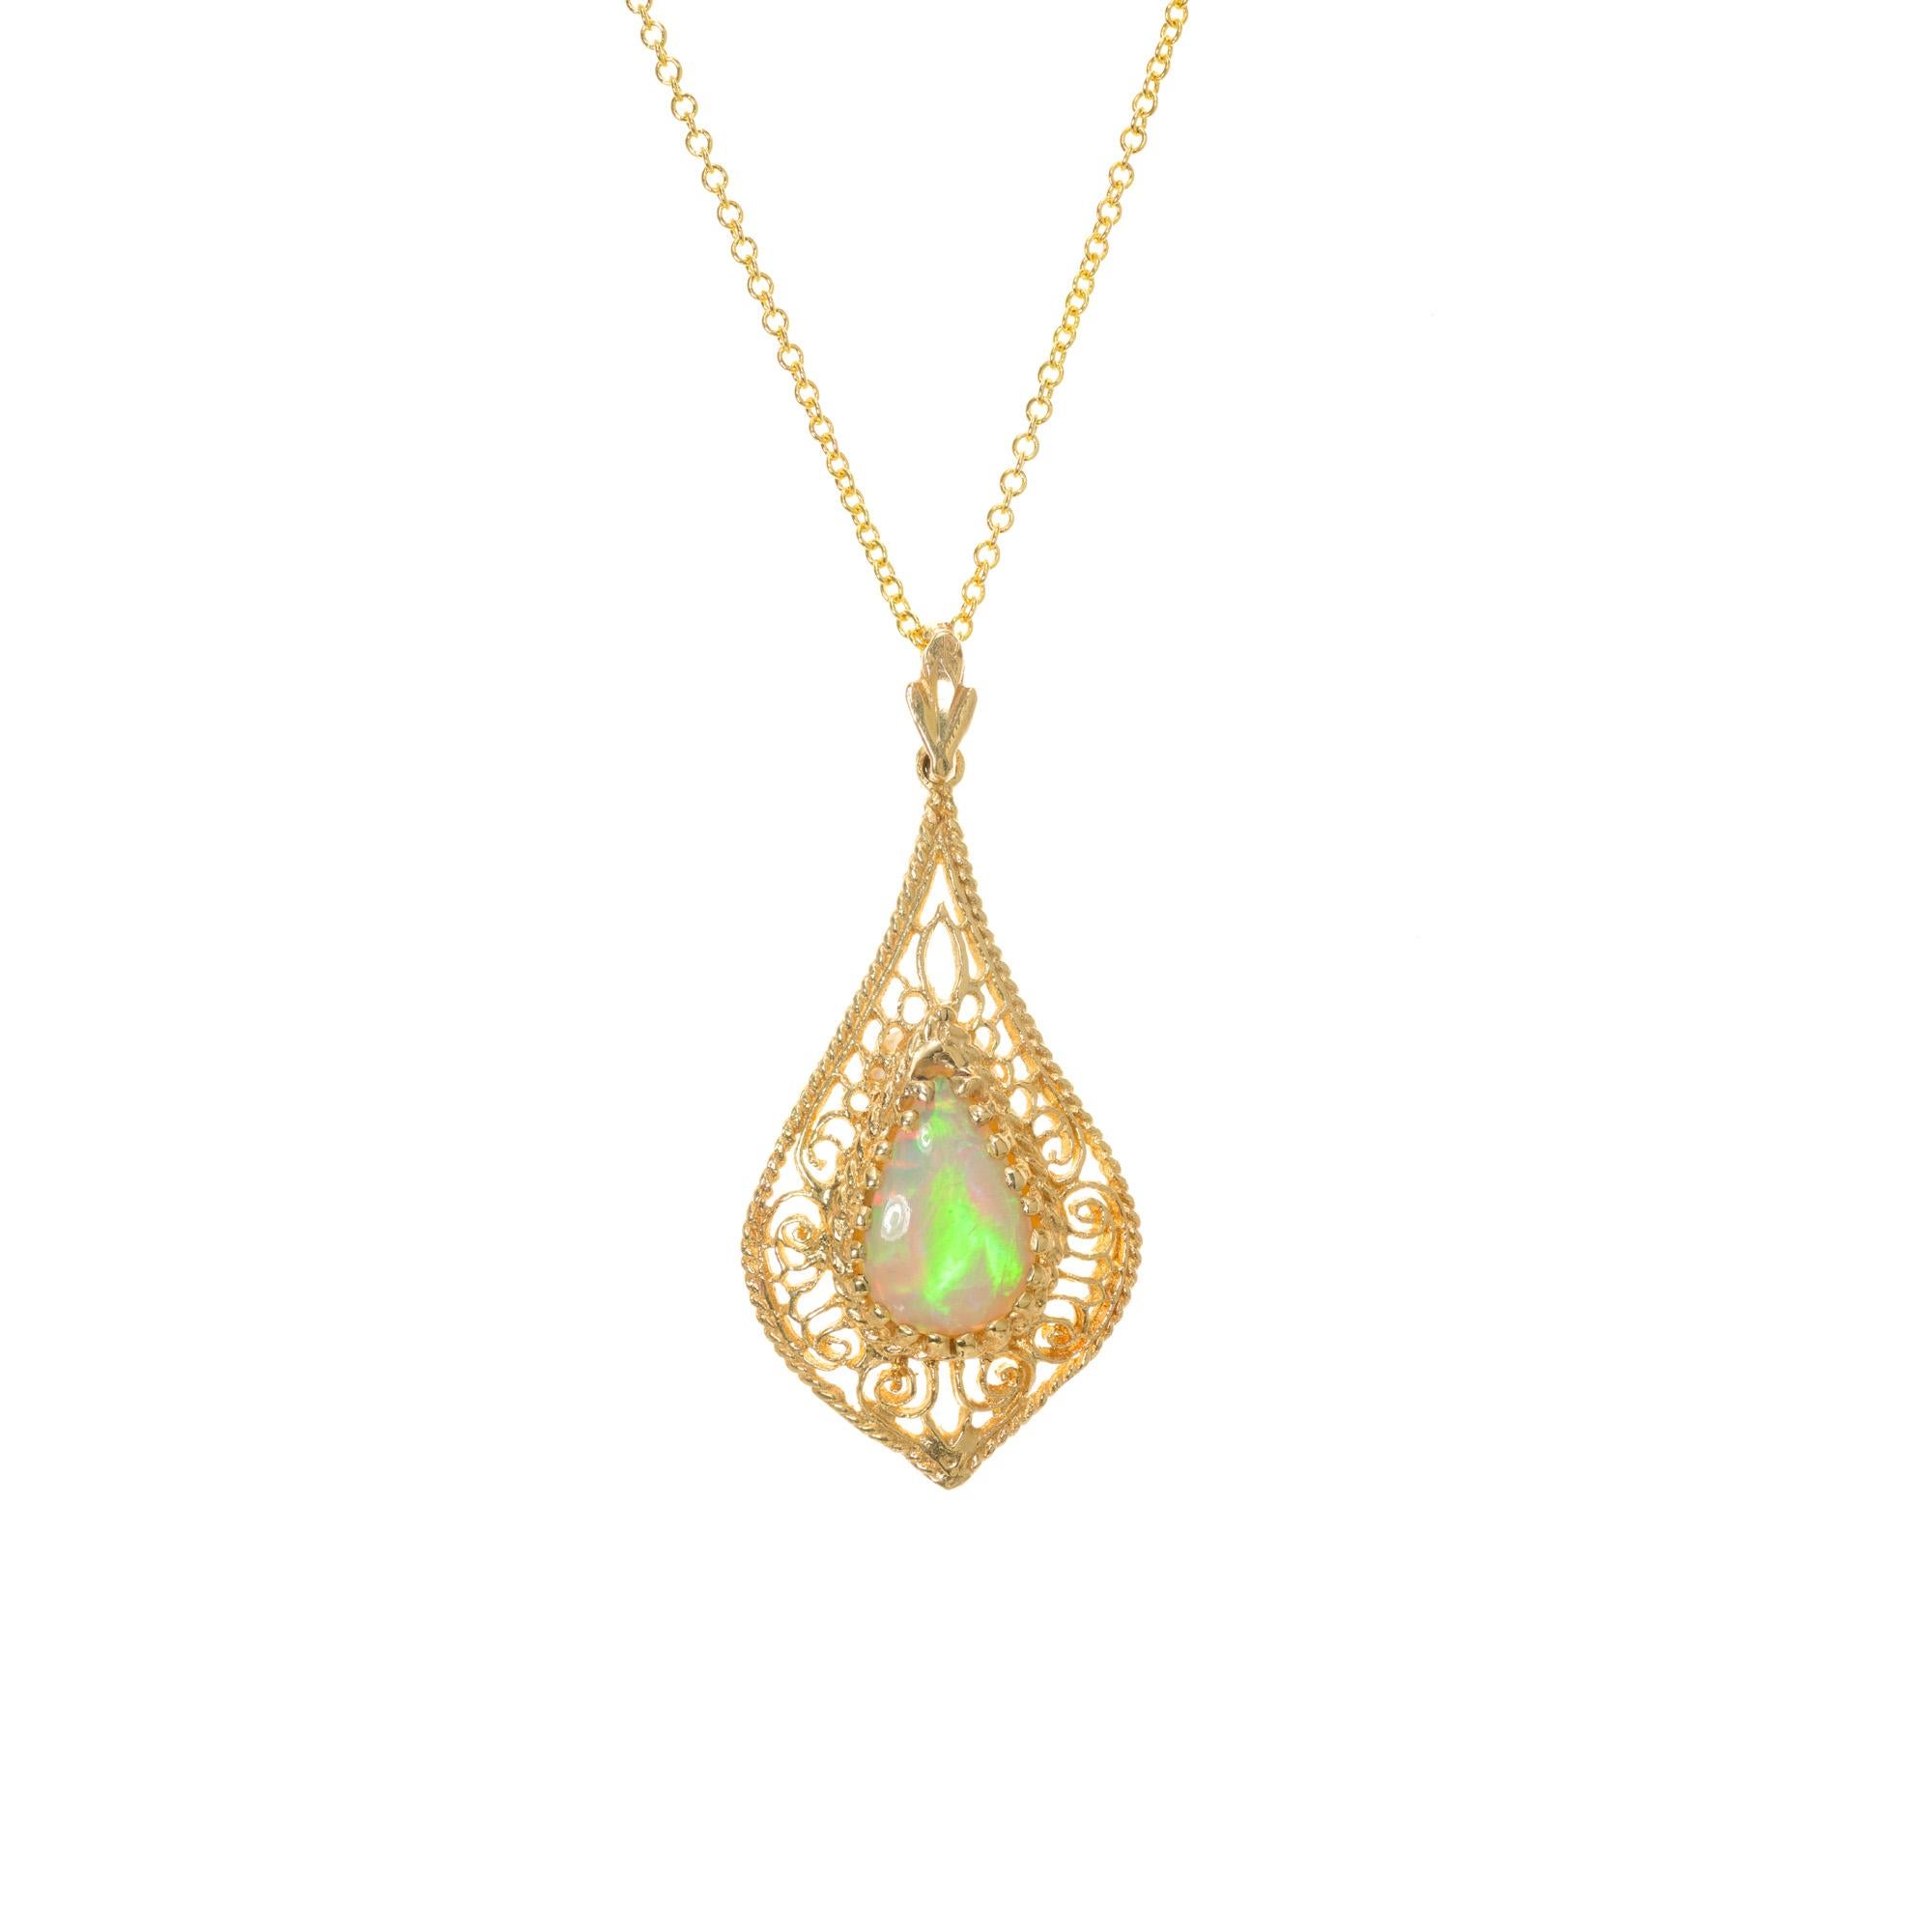 1960's Bight orange green opal filagree pendant necklace. Pear shaped 1.44ct opal set in a exquisitely finely detailed filigree setting.  With an 18 Inch 14k yellow gold chain. 
Follow us on our 1stdibs storefront to view our weekly new additions